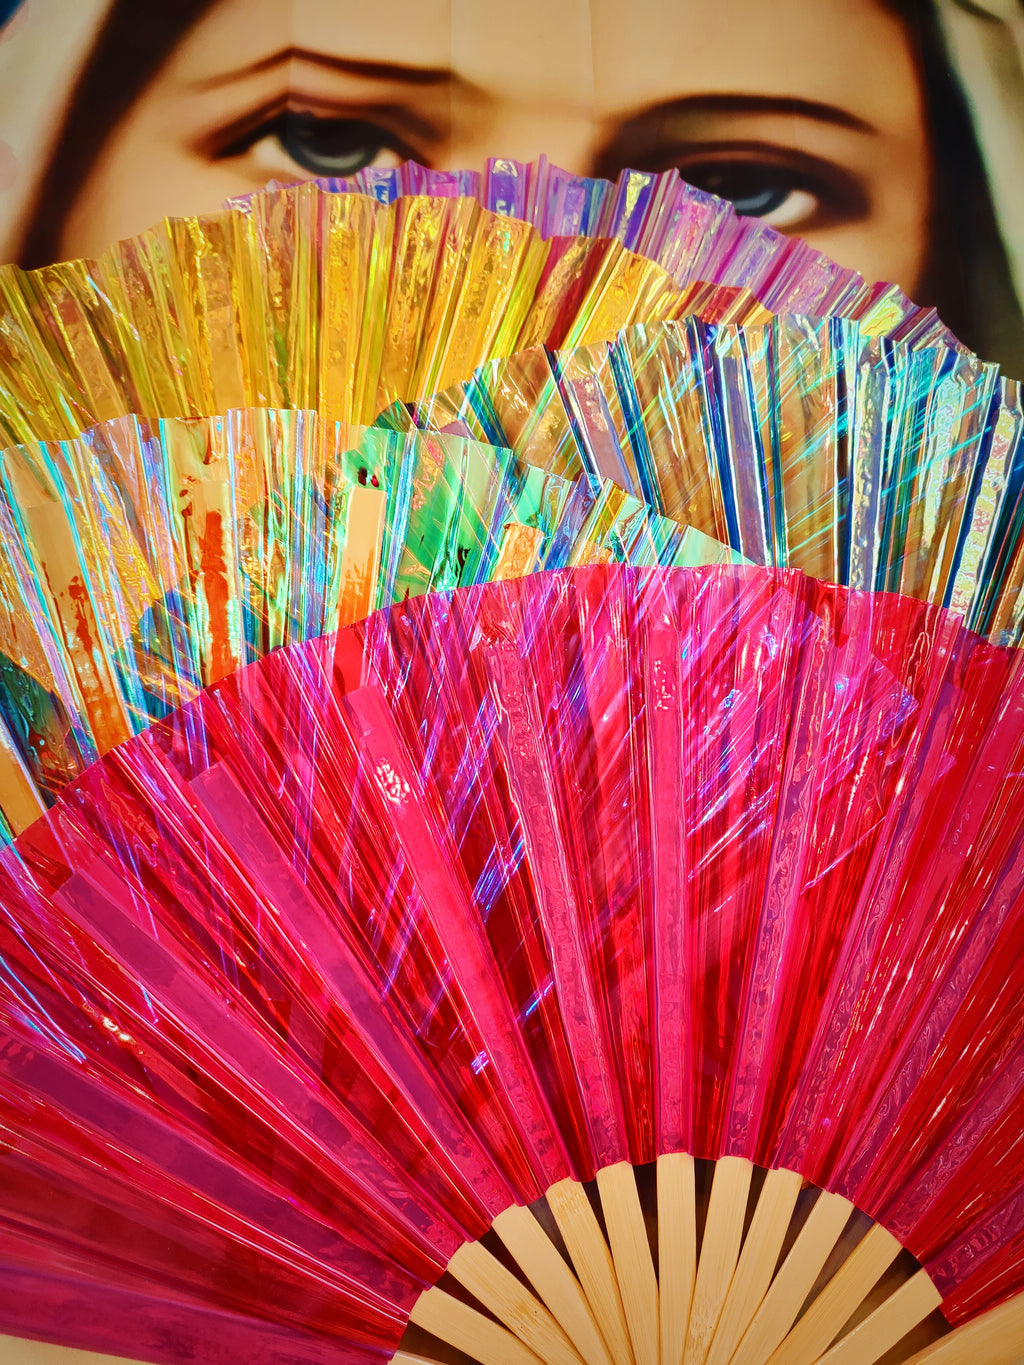 Big, glowing, beautiful iridescent fans,for dancing, parties, festivals and glam menopause moments!!

Also make fabulous display pieces on walls or shelves

Beautifully made from bamboo and iridescent plastic

 60cm x 34cm when open. 

